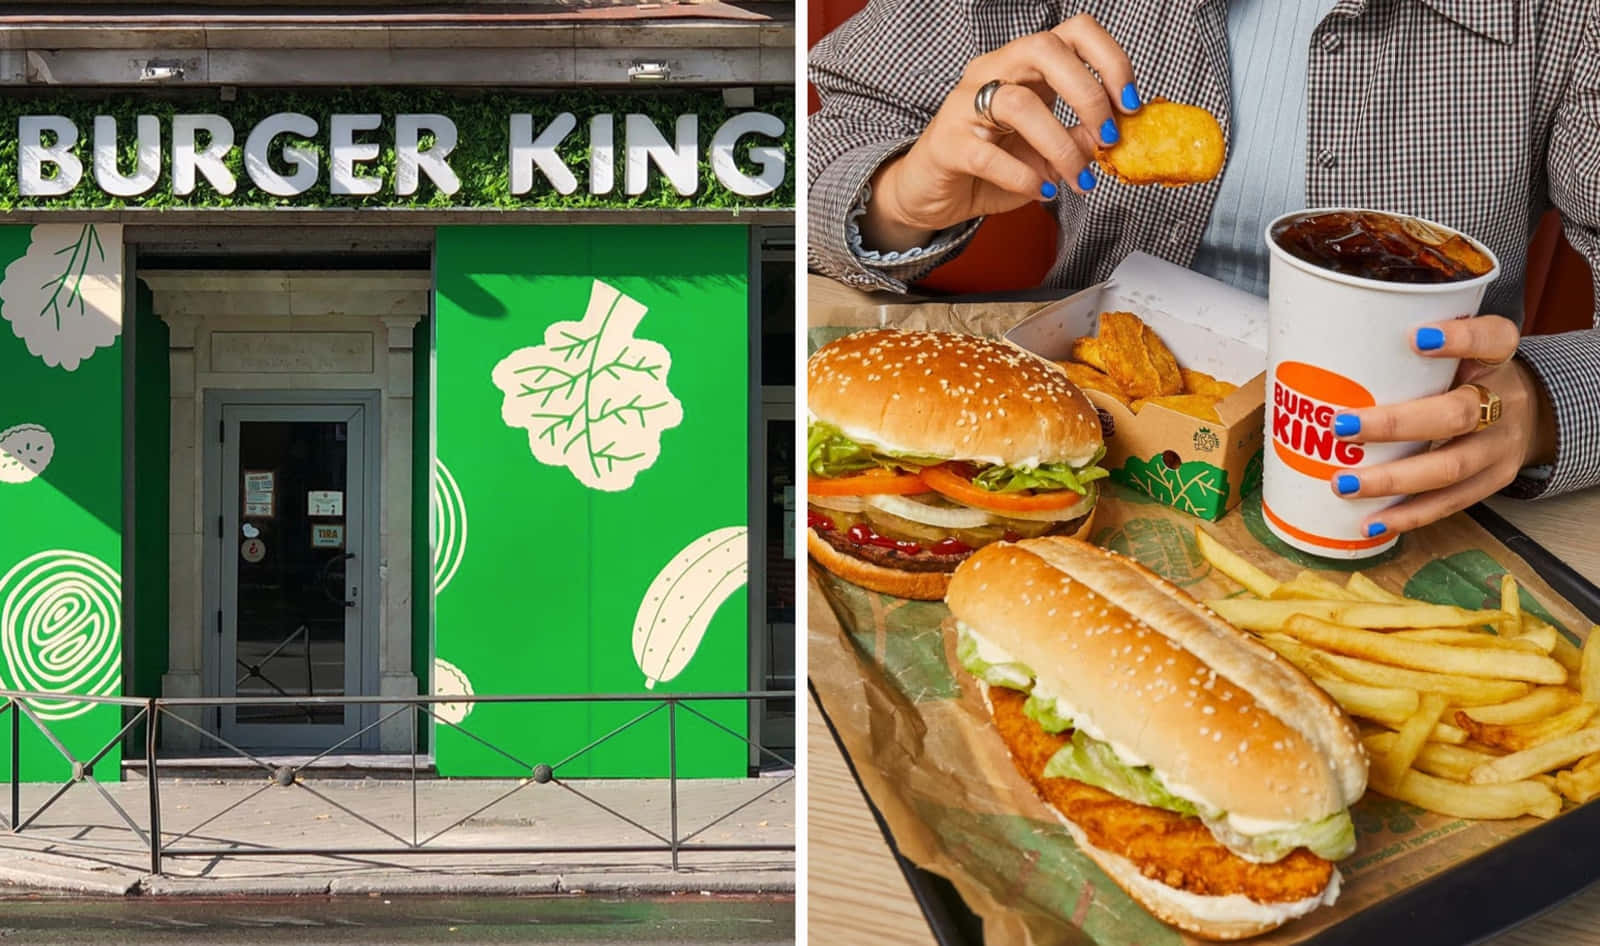 Enjoy a tasty meal with Burger King